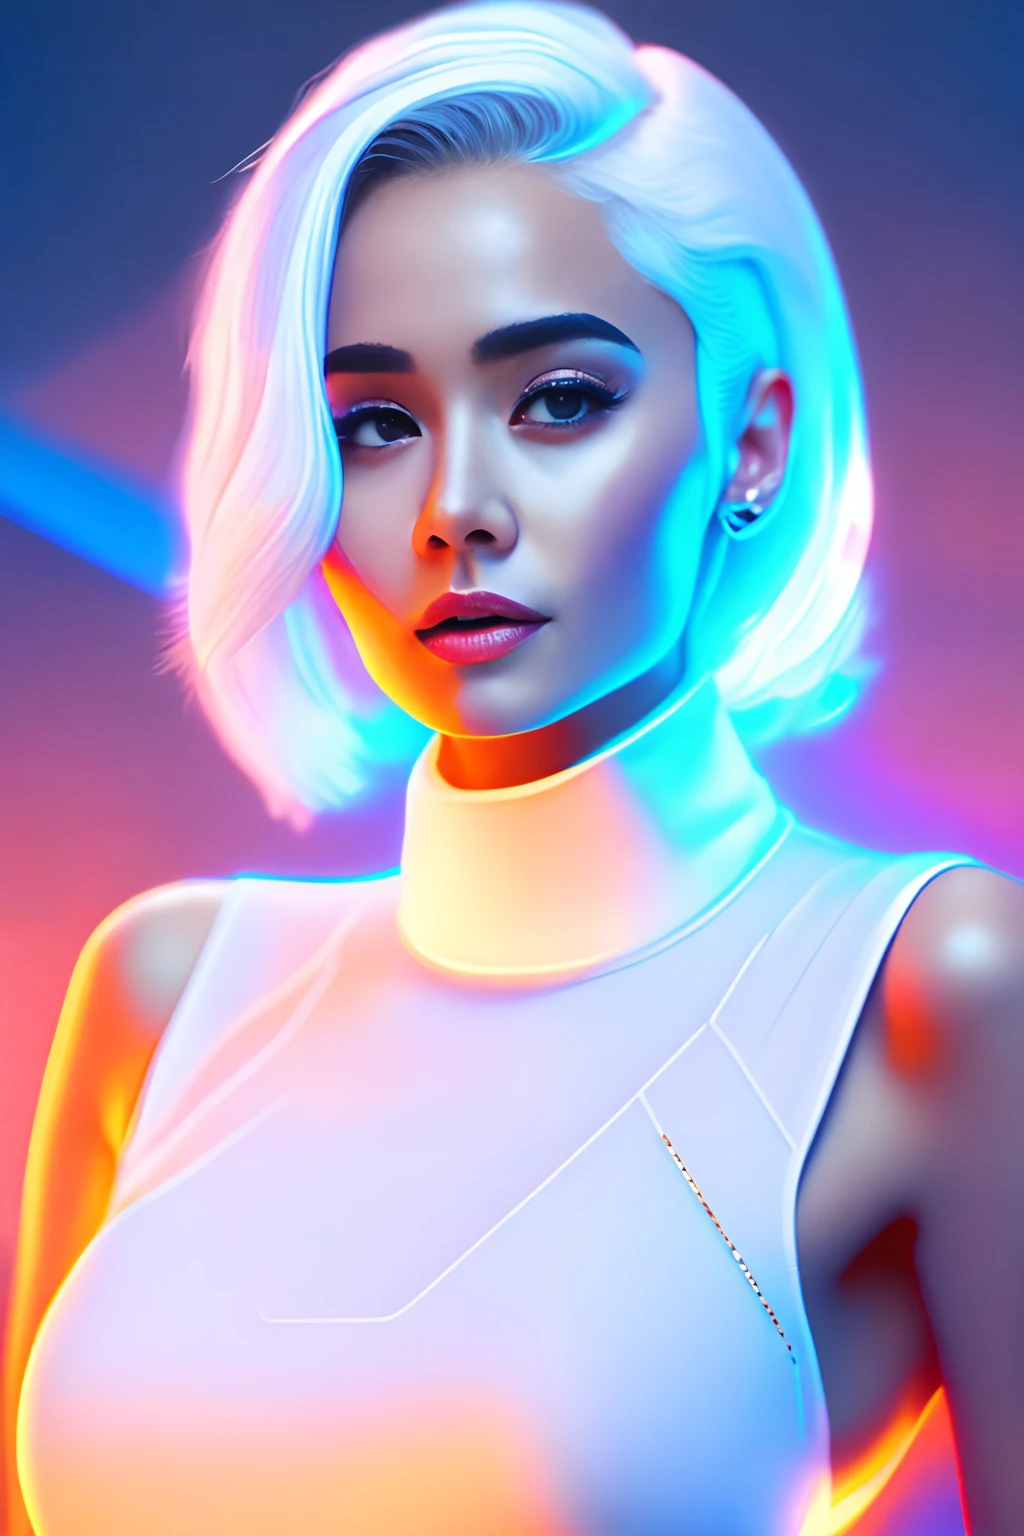 8k, hd, neon, retro, chic, full-length,
23-year-old girl, with short white hair pixie hairstyles, cute face, face like daenerys, toned body, elegant, white turtleneck tank top, blue trousers, night, neon, hd